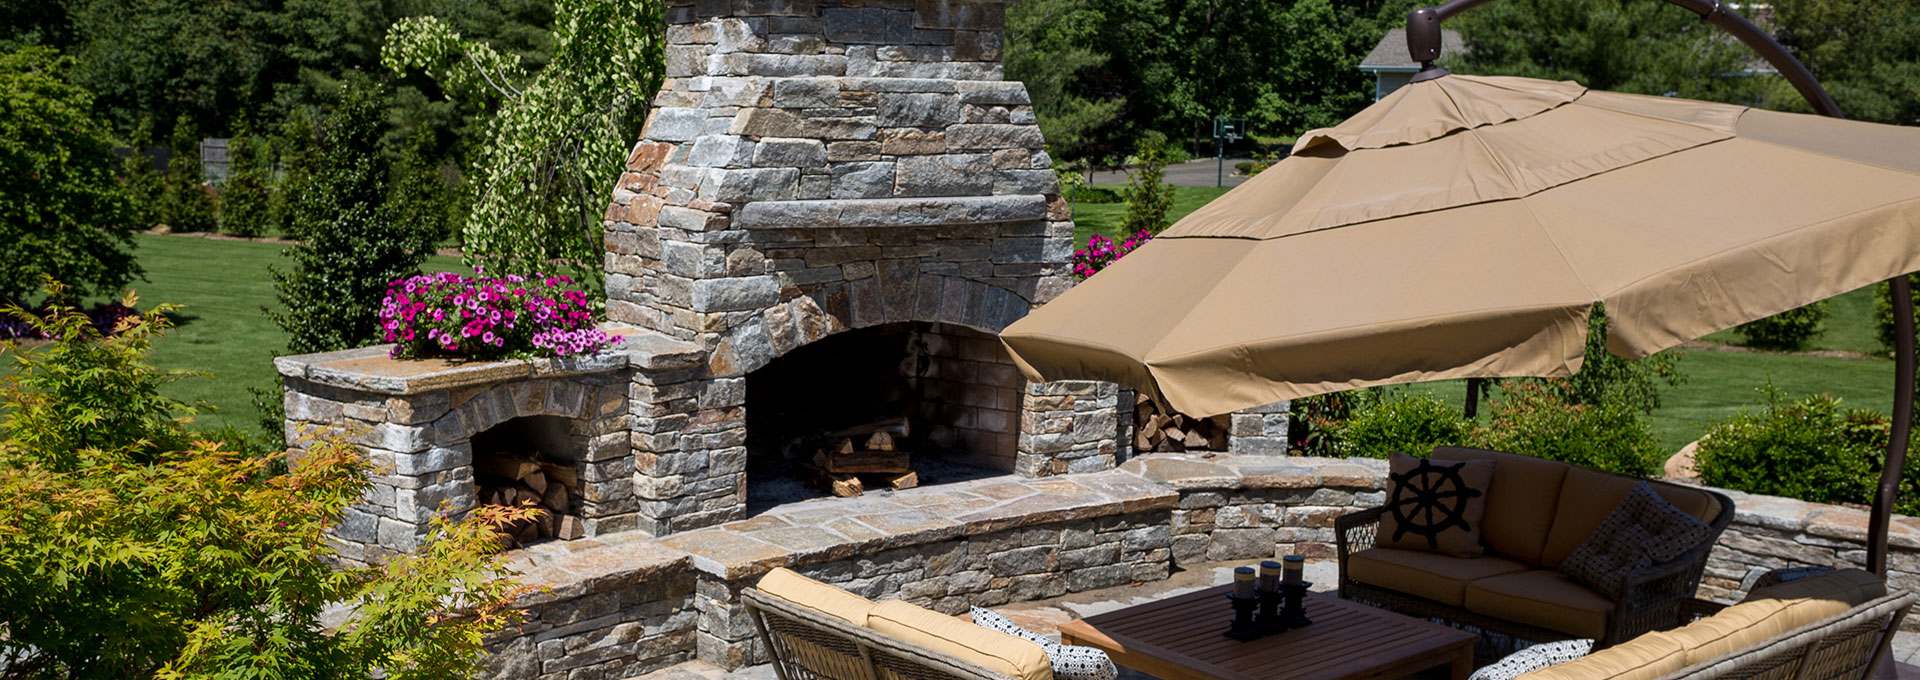 Thinstone Siding for outdoor fireplace